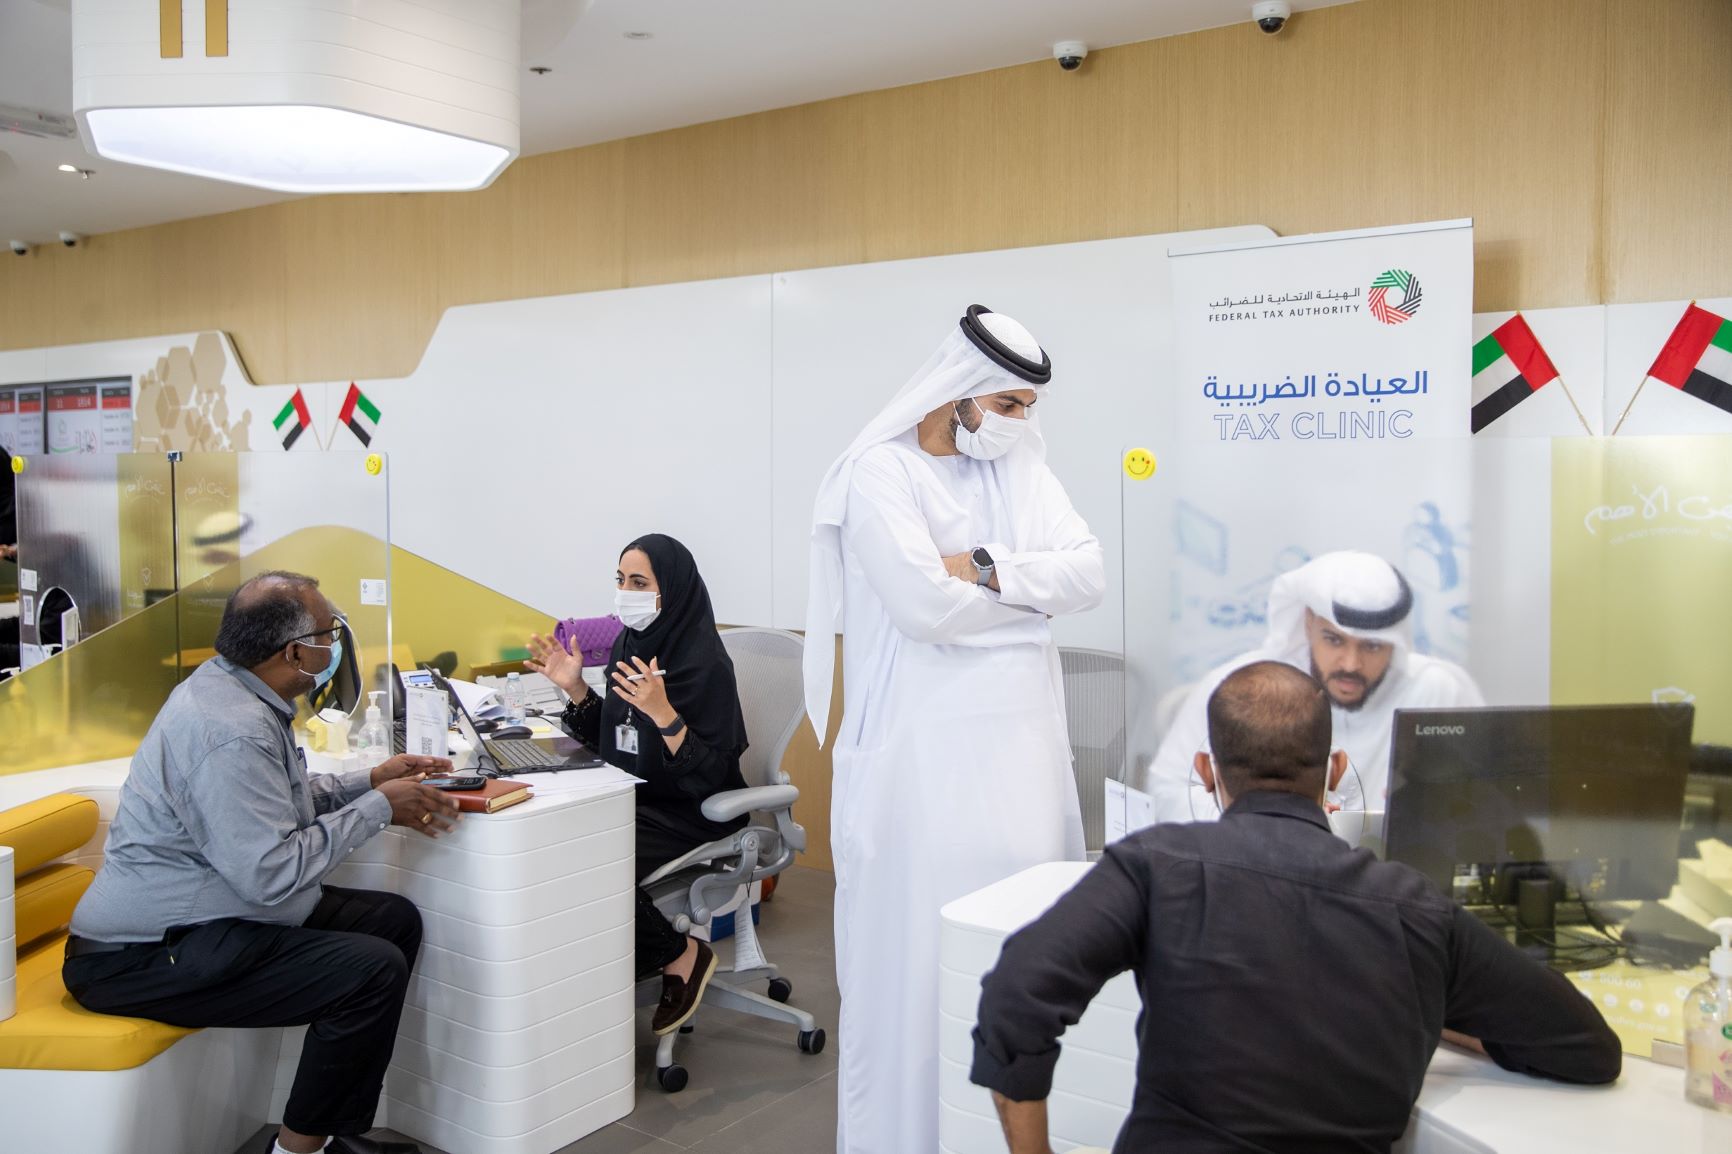 Federal Tax Authority resumes Tax Clinic initiative with field activities in Ras Al Khaimah and Sharjah